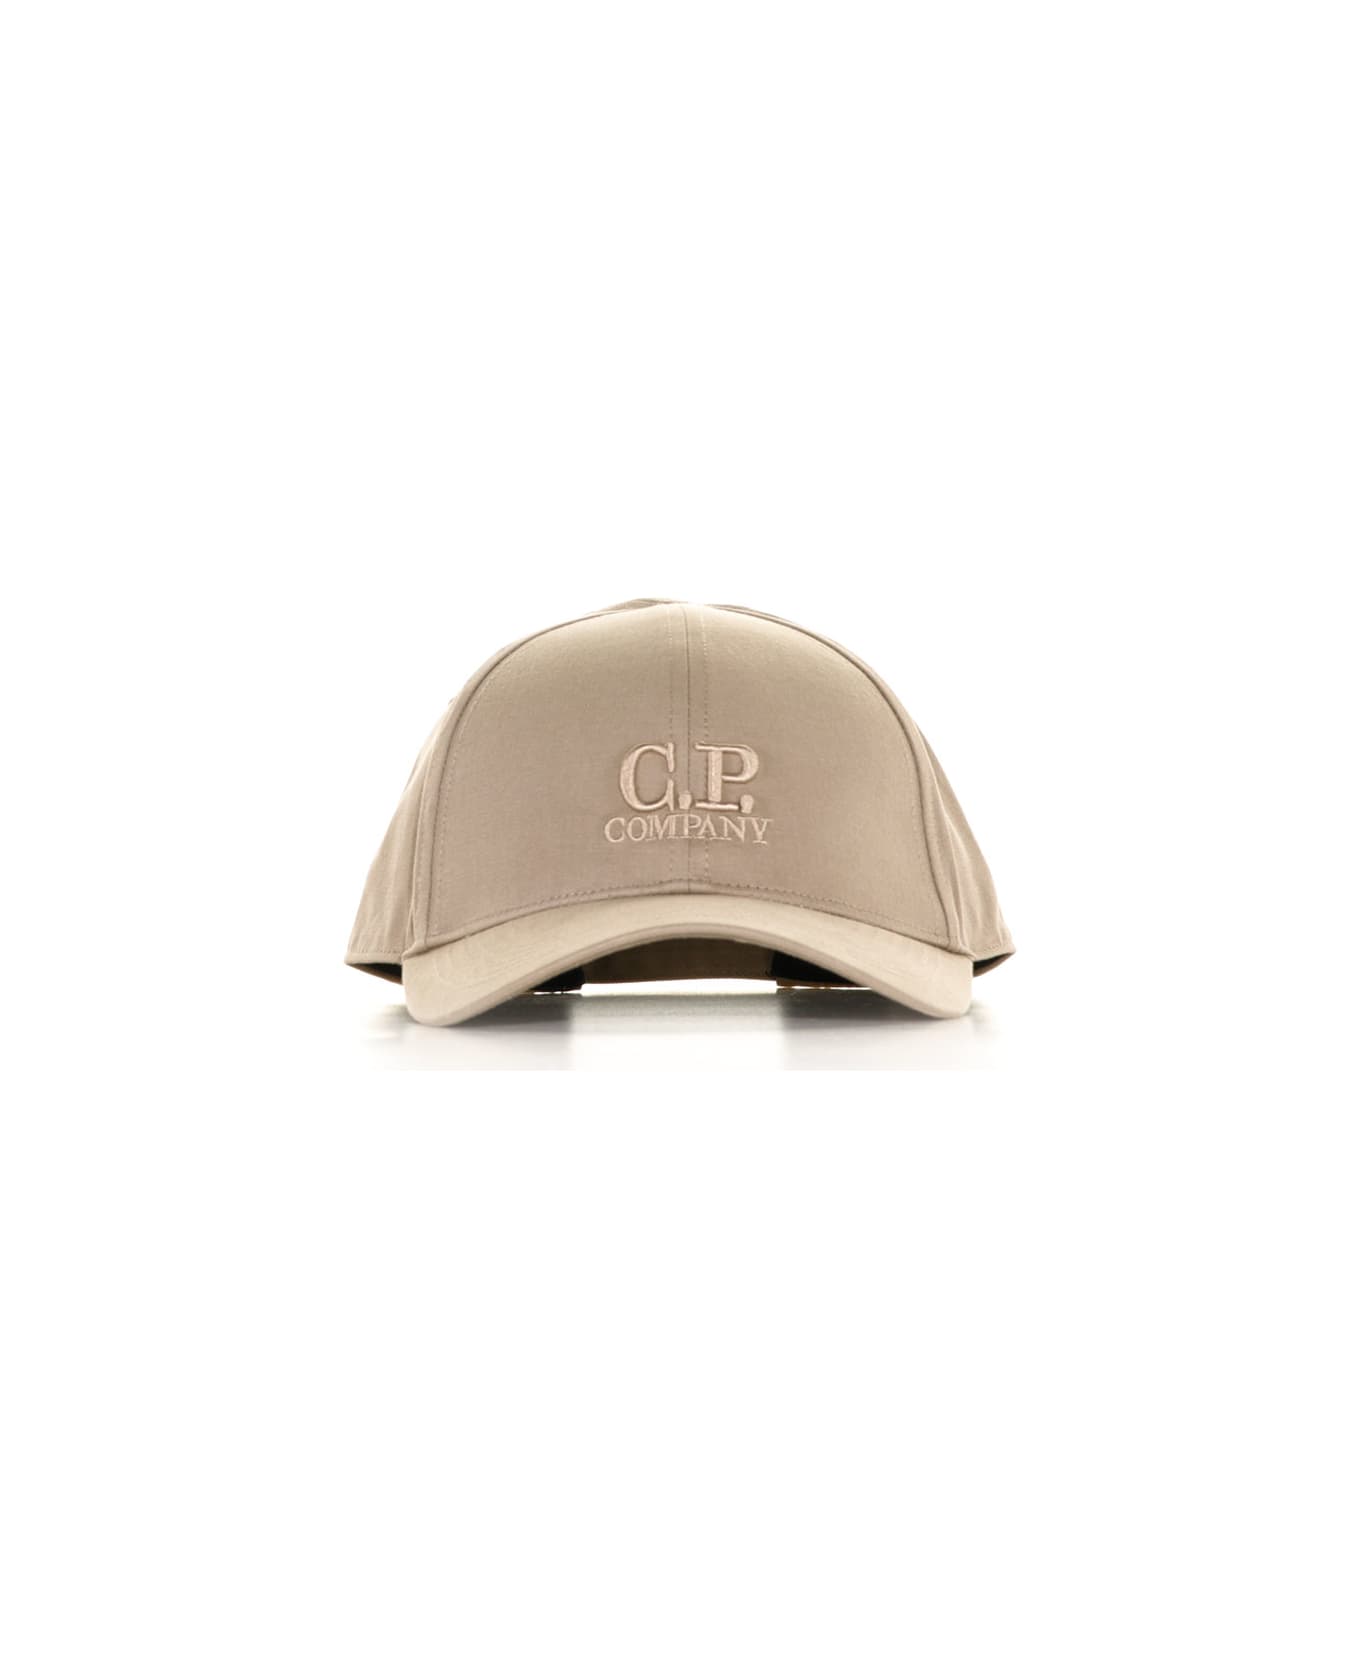 C.P. Company Cap With Embroidered Logo - SABBIA